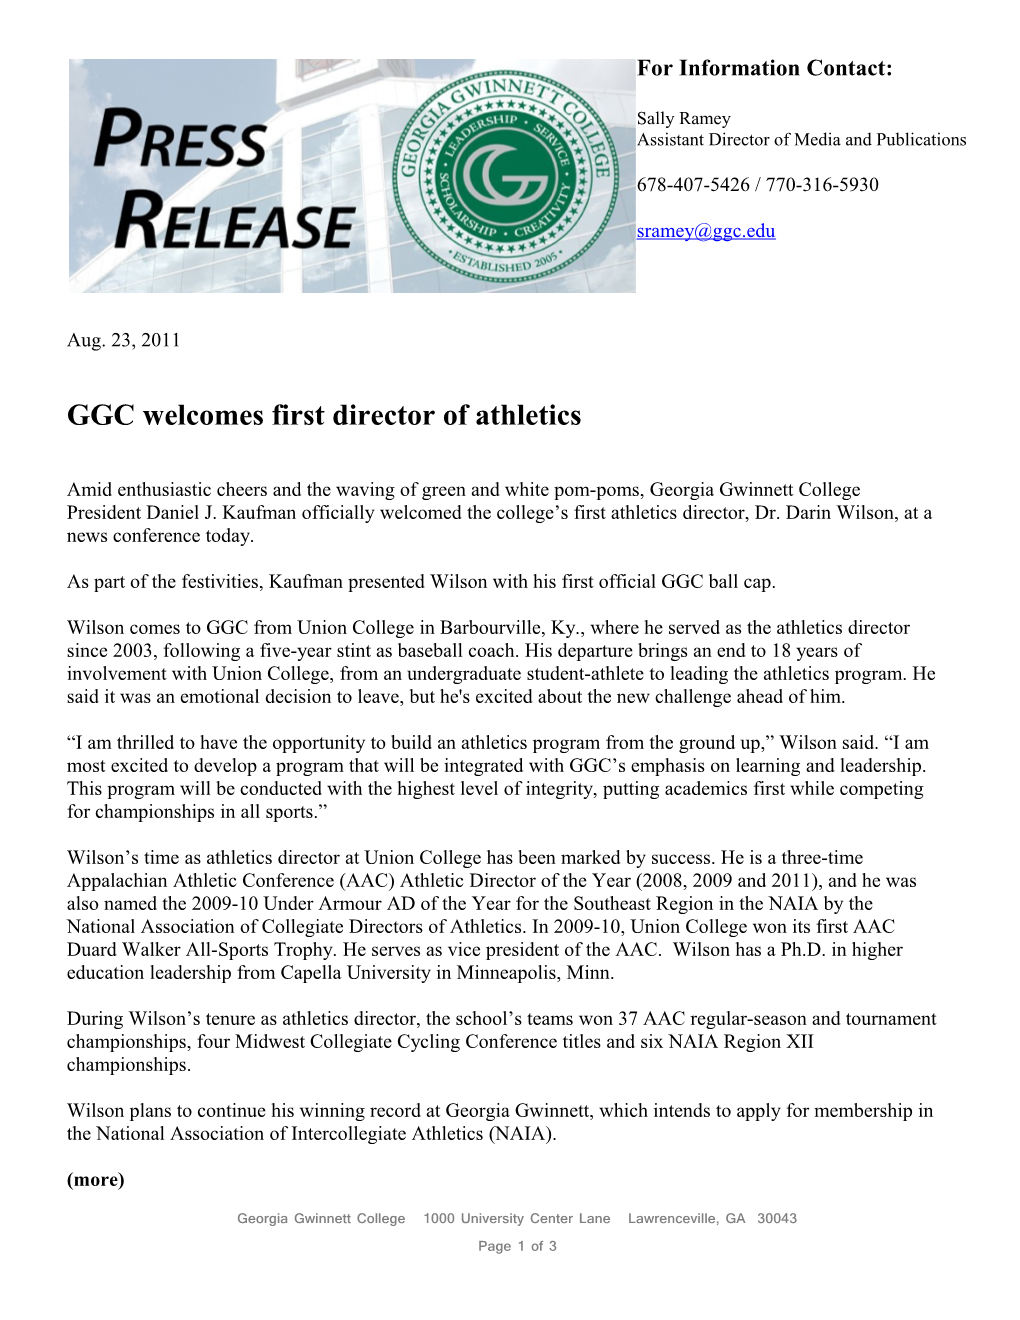 GGC Welcomes First Director of Athletics